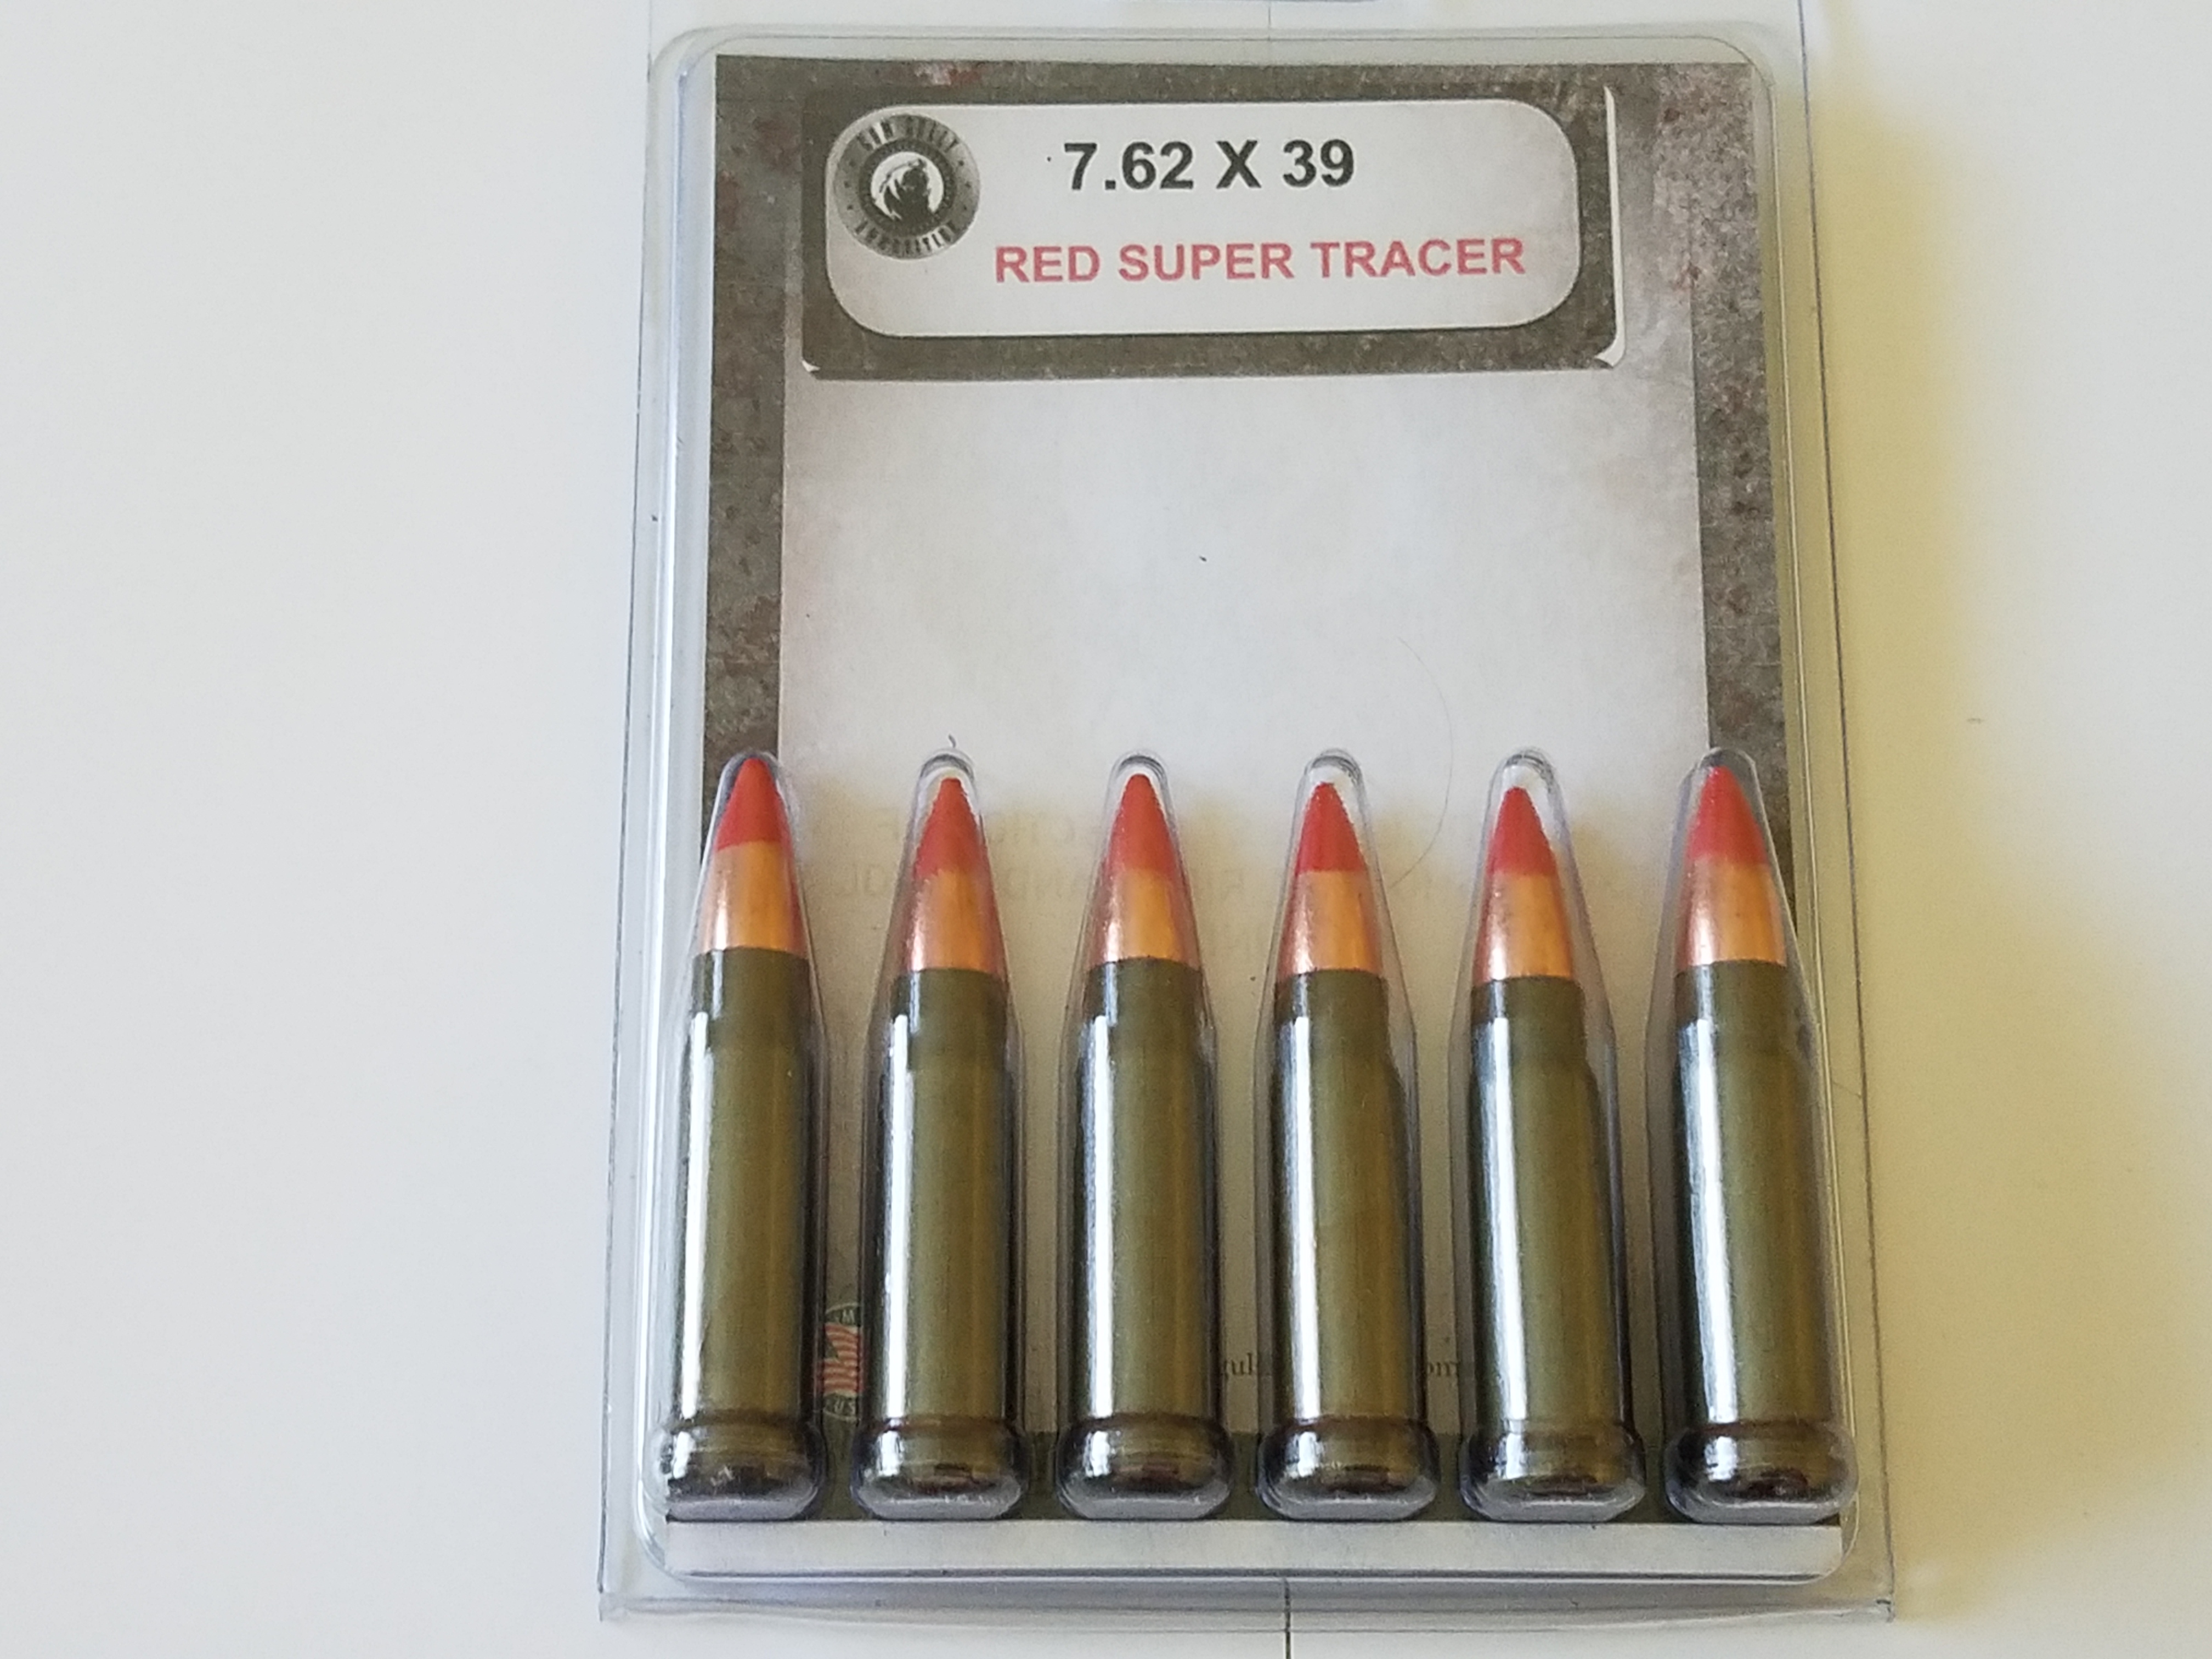 7.62 X 39 Red Super Tracer – Gum Gully Provision4032 x 3024